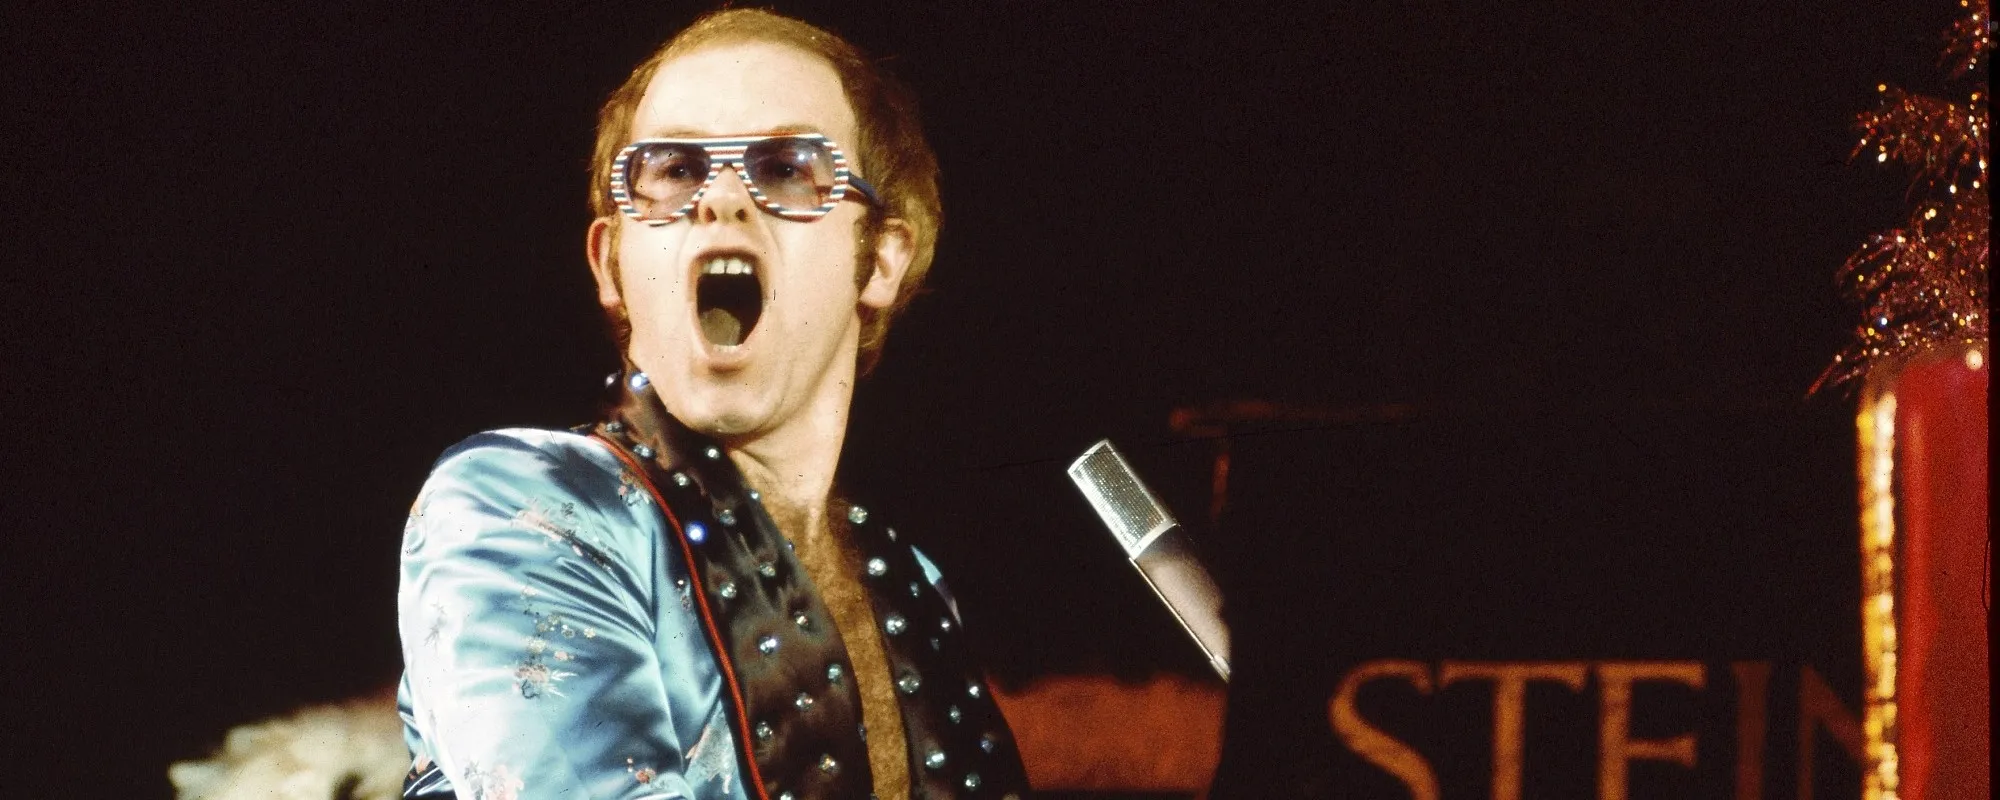 Remember When: Elton John’s Classic Song “Bennie and the Jets” Became His Second No. 1 ‘Billboard’ Hot 100 Hit